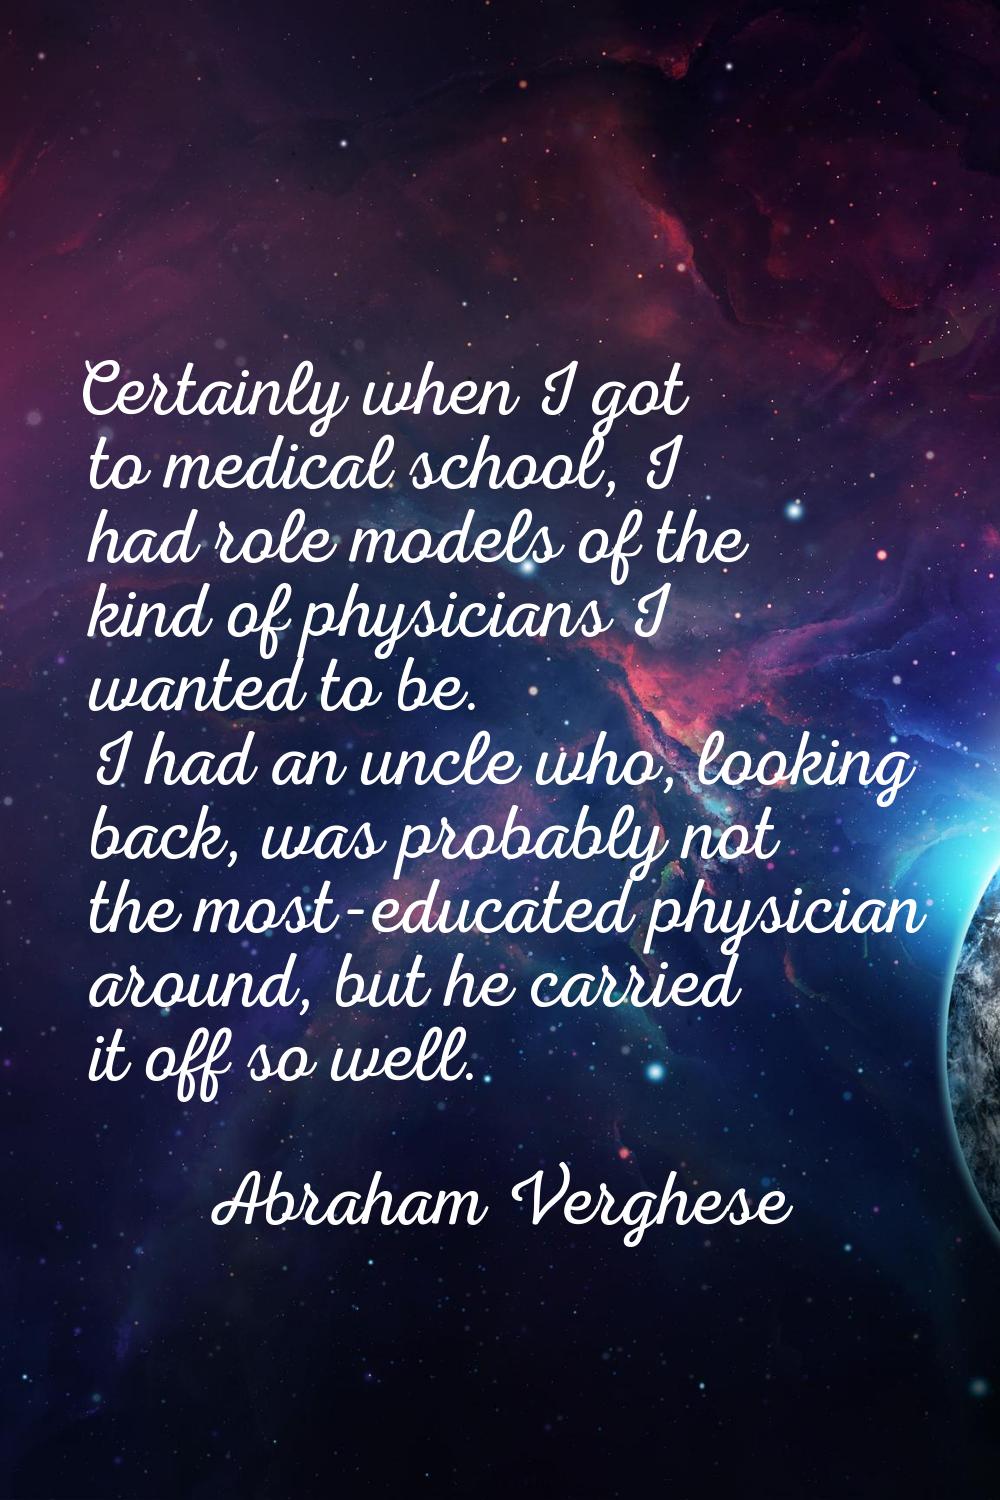 Certainly when I got to medical school, I had role models of the kind of physicians I wanted to be.